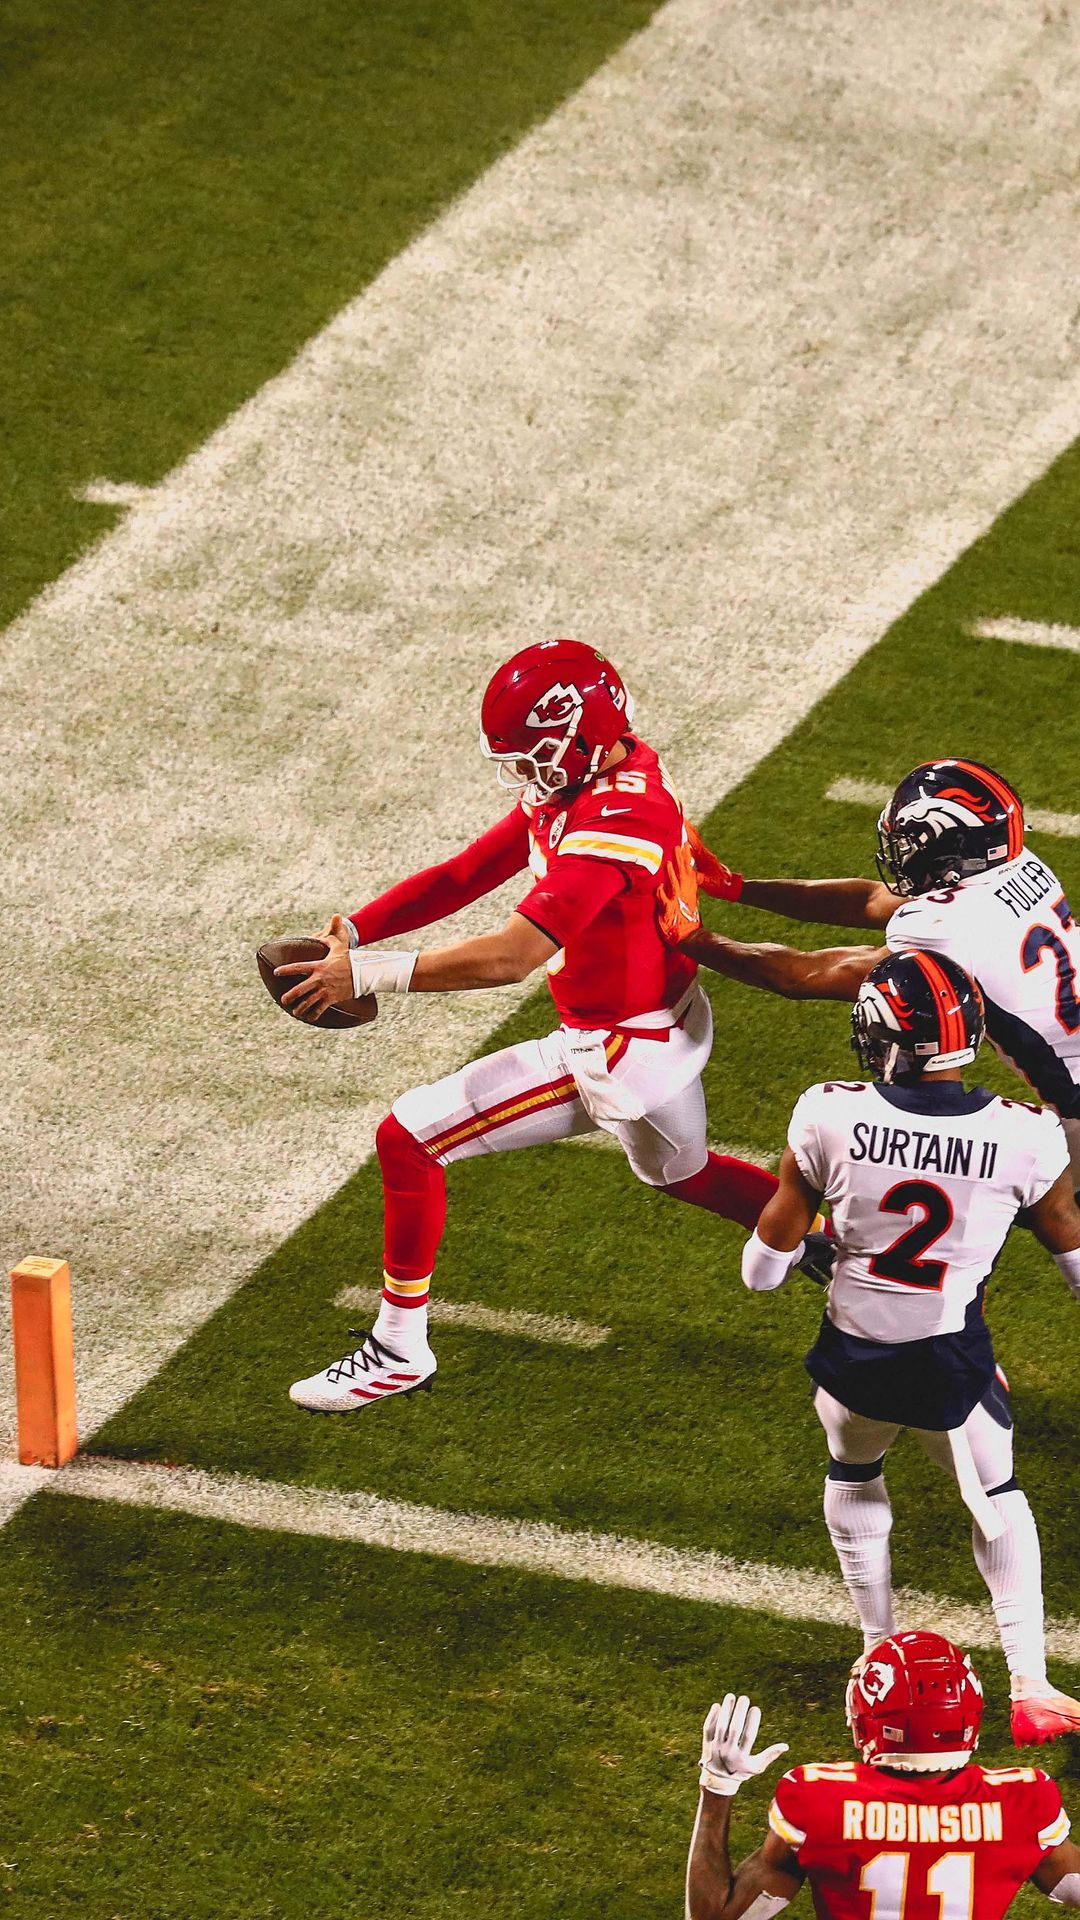 Don’t let 15 find space  #TouchdownTuesday  More highlights on chiefs.com....